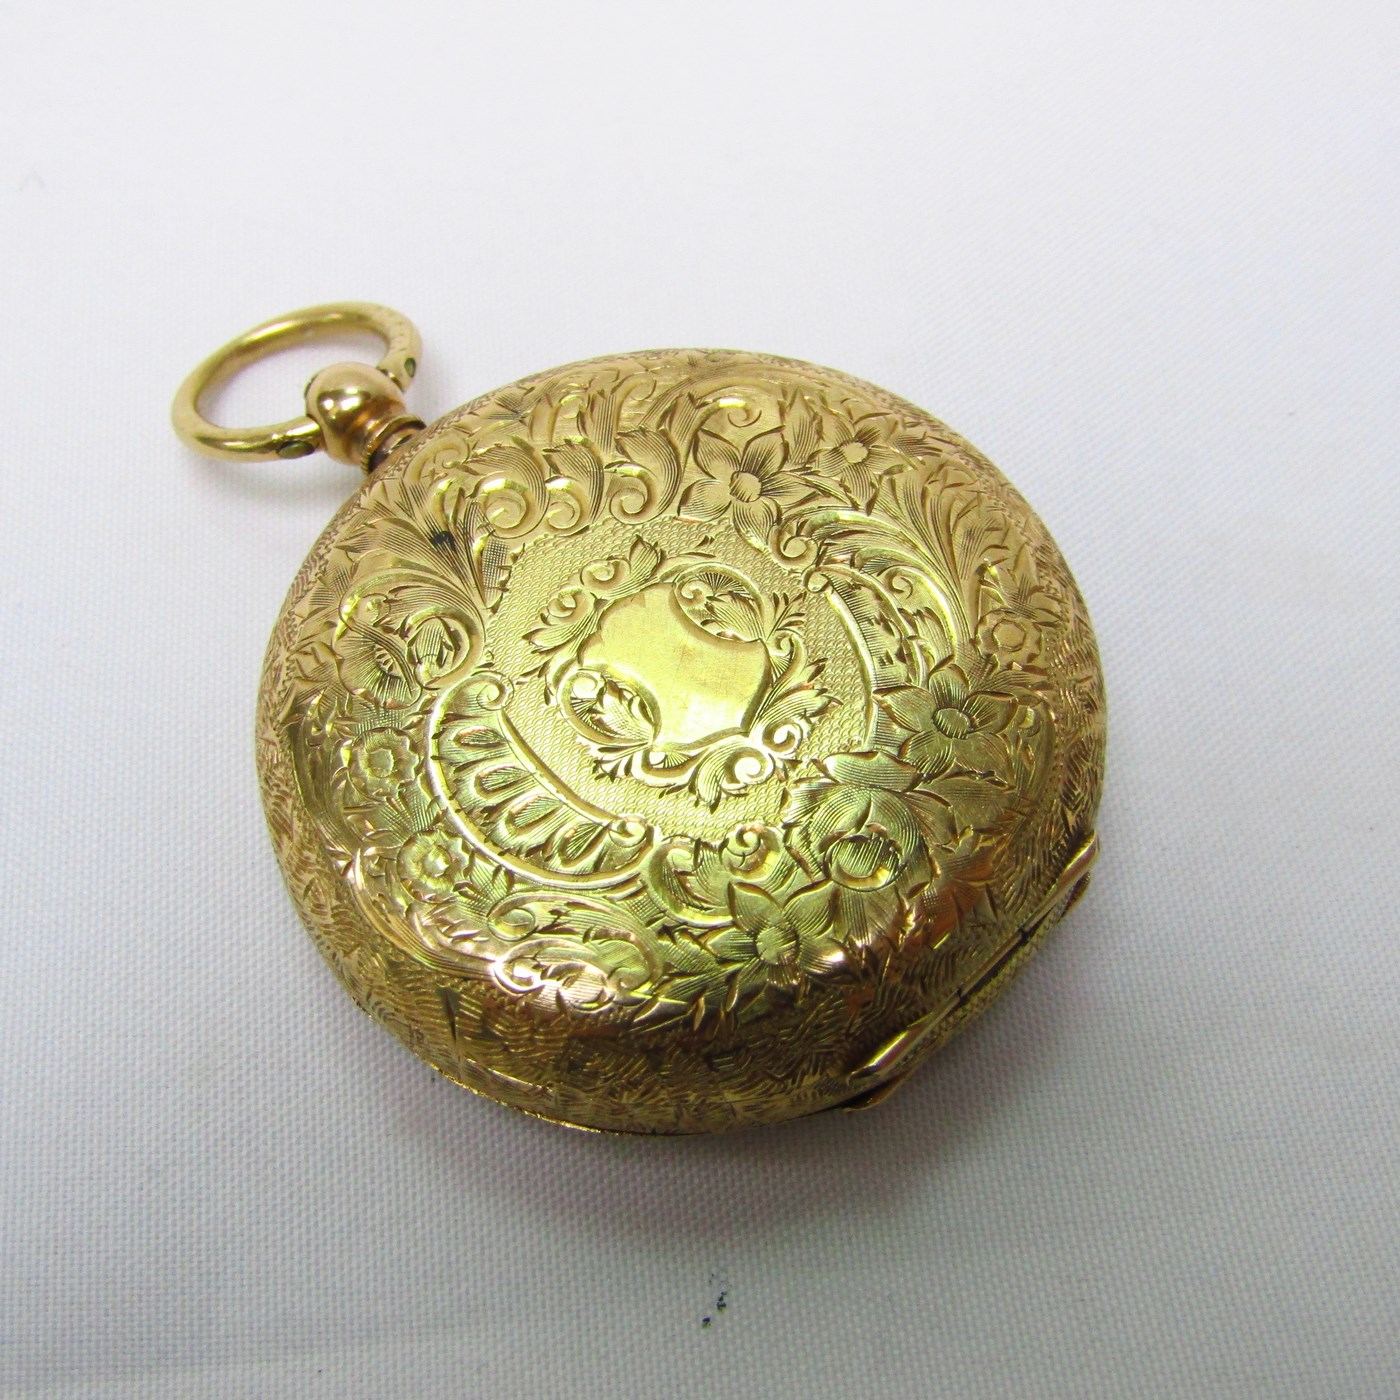 Antique ladies pocket or hanging watch with silver case Jewellery Watches Pocket Watches 19th century. 